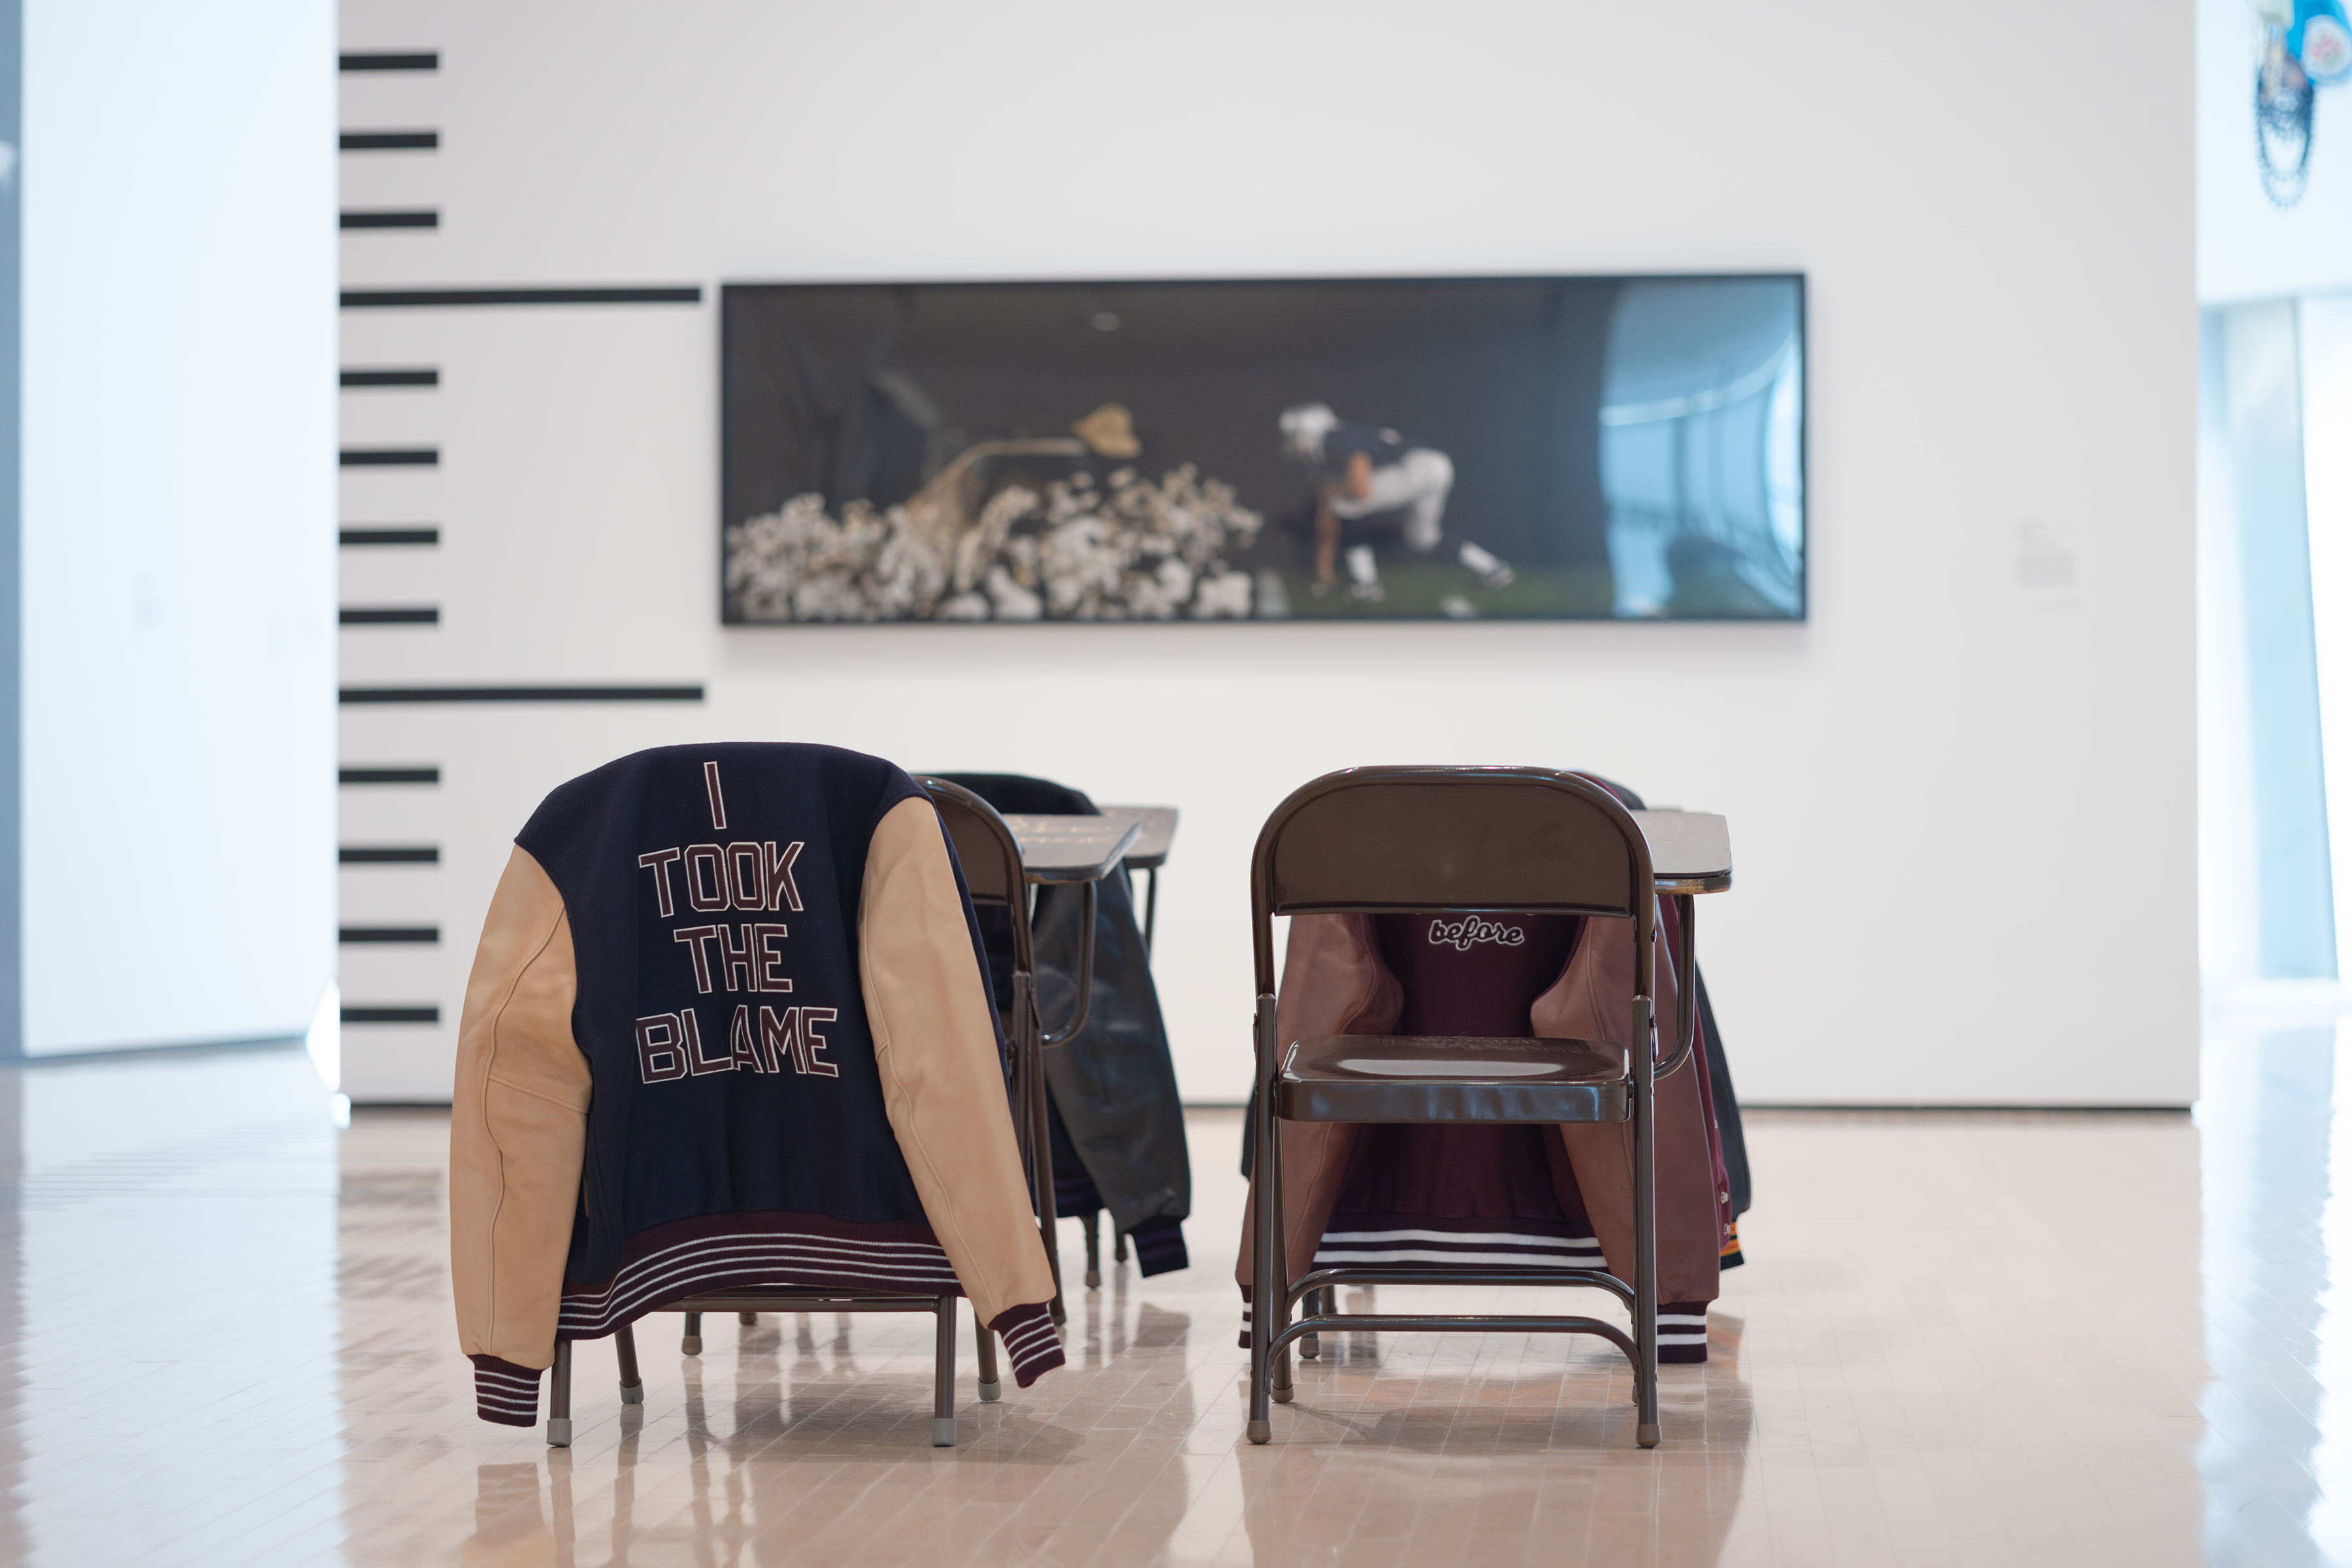  Classroom desks with varsity jackets hanging off the back of the chair in the MSU Broad ARt Museum’s “Resistance Training” exhibition. One of the jackets says, “I took the blame” on the back